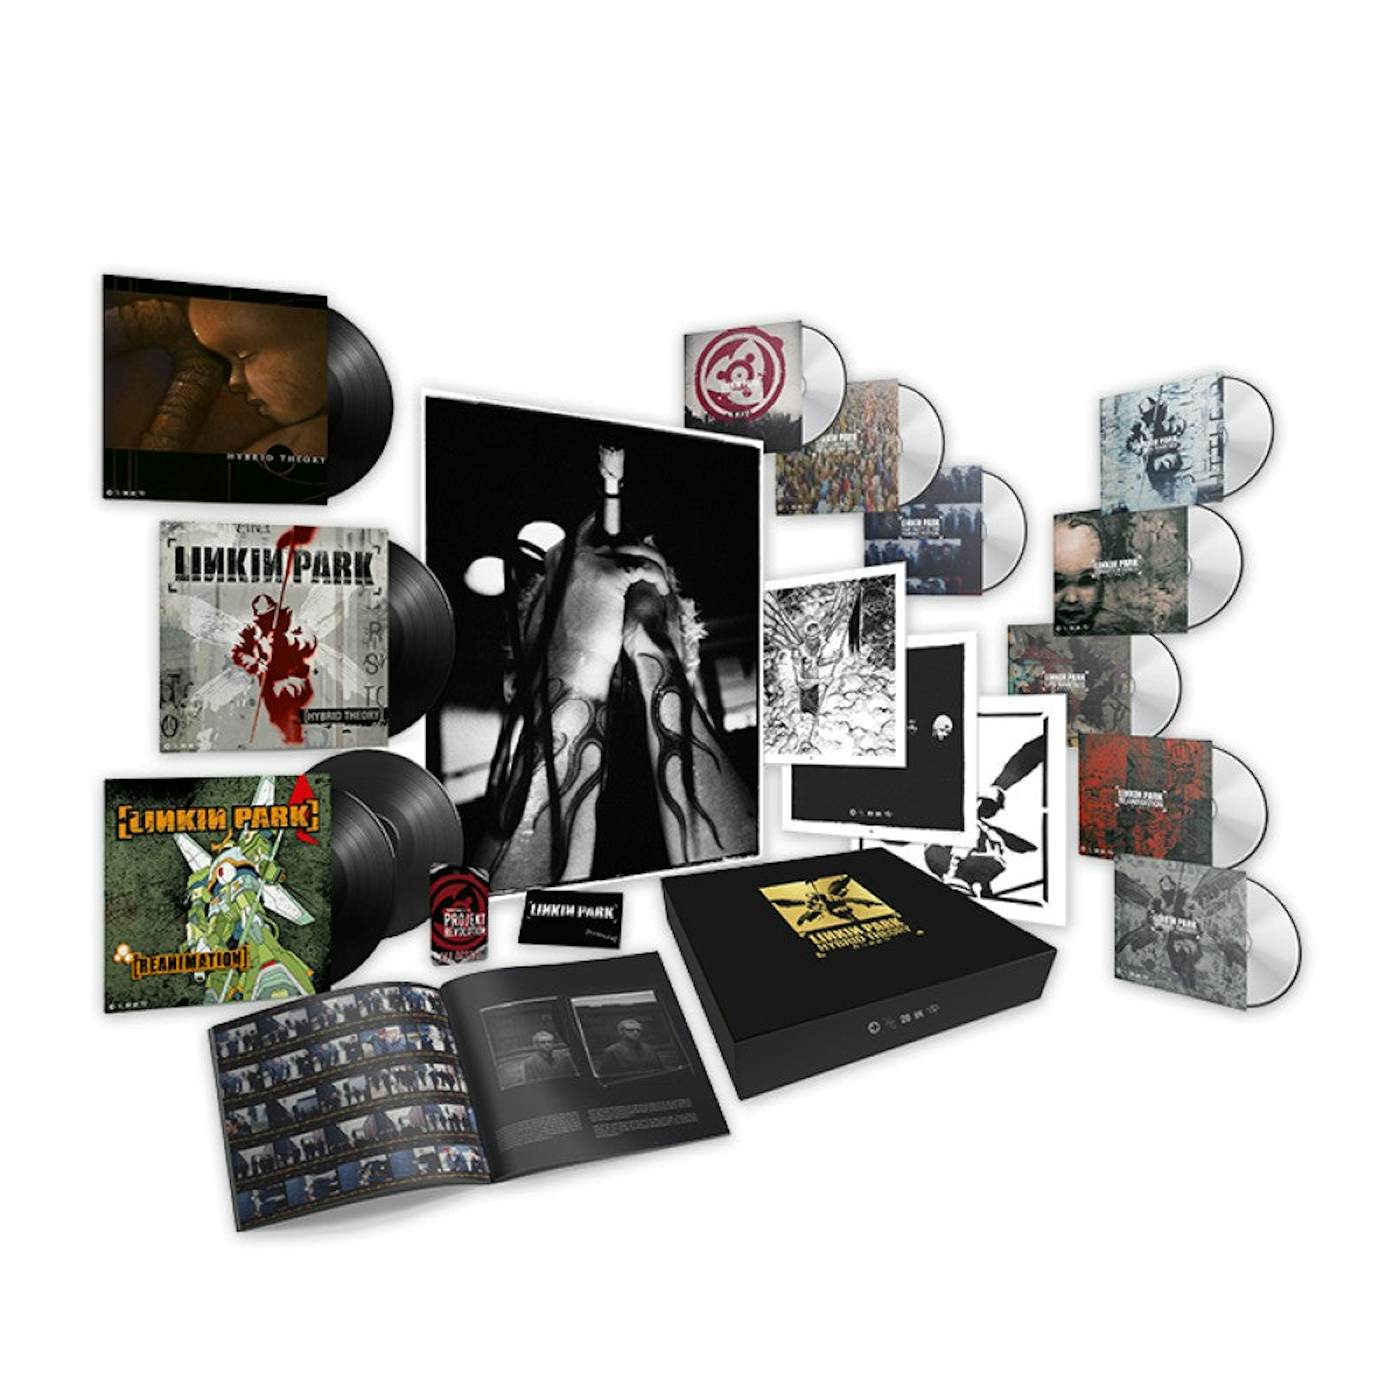 Linkin Park Hybrid Theory: 20th Anniversary Edition Super Deluxe Box Set